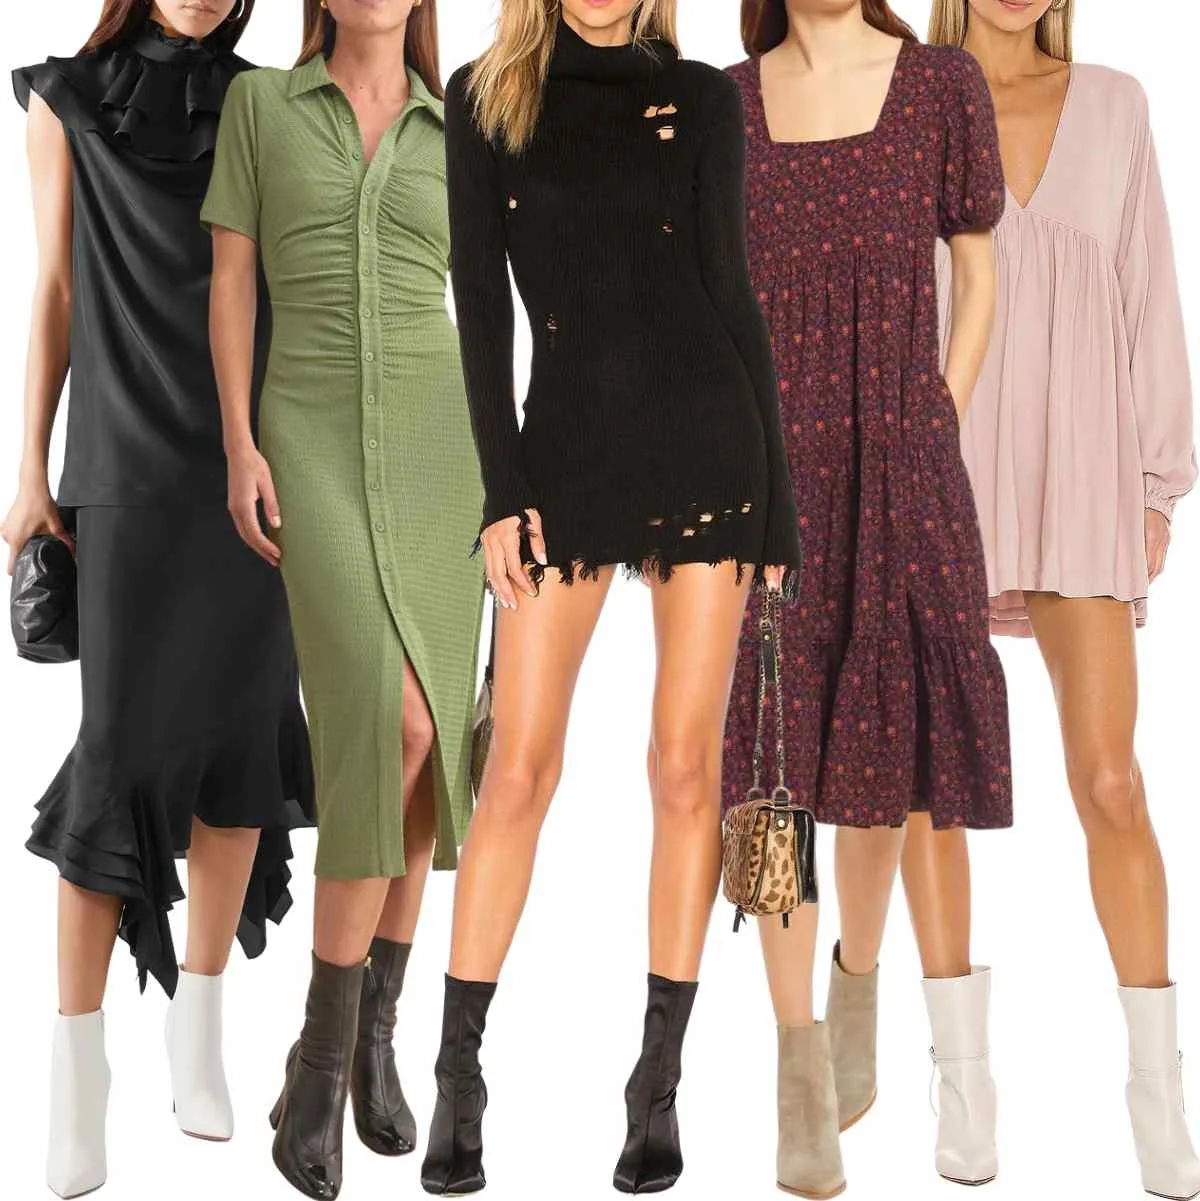 Collage of 5 women wearing different dresses with ankle boots.